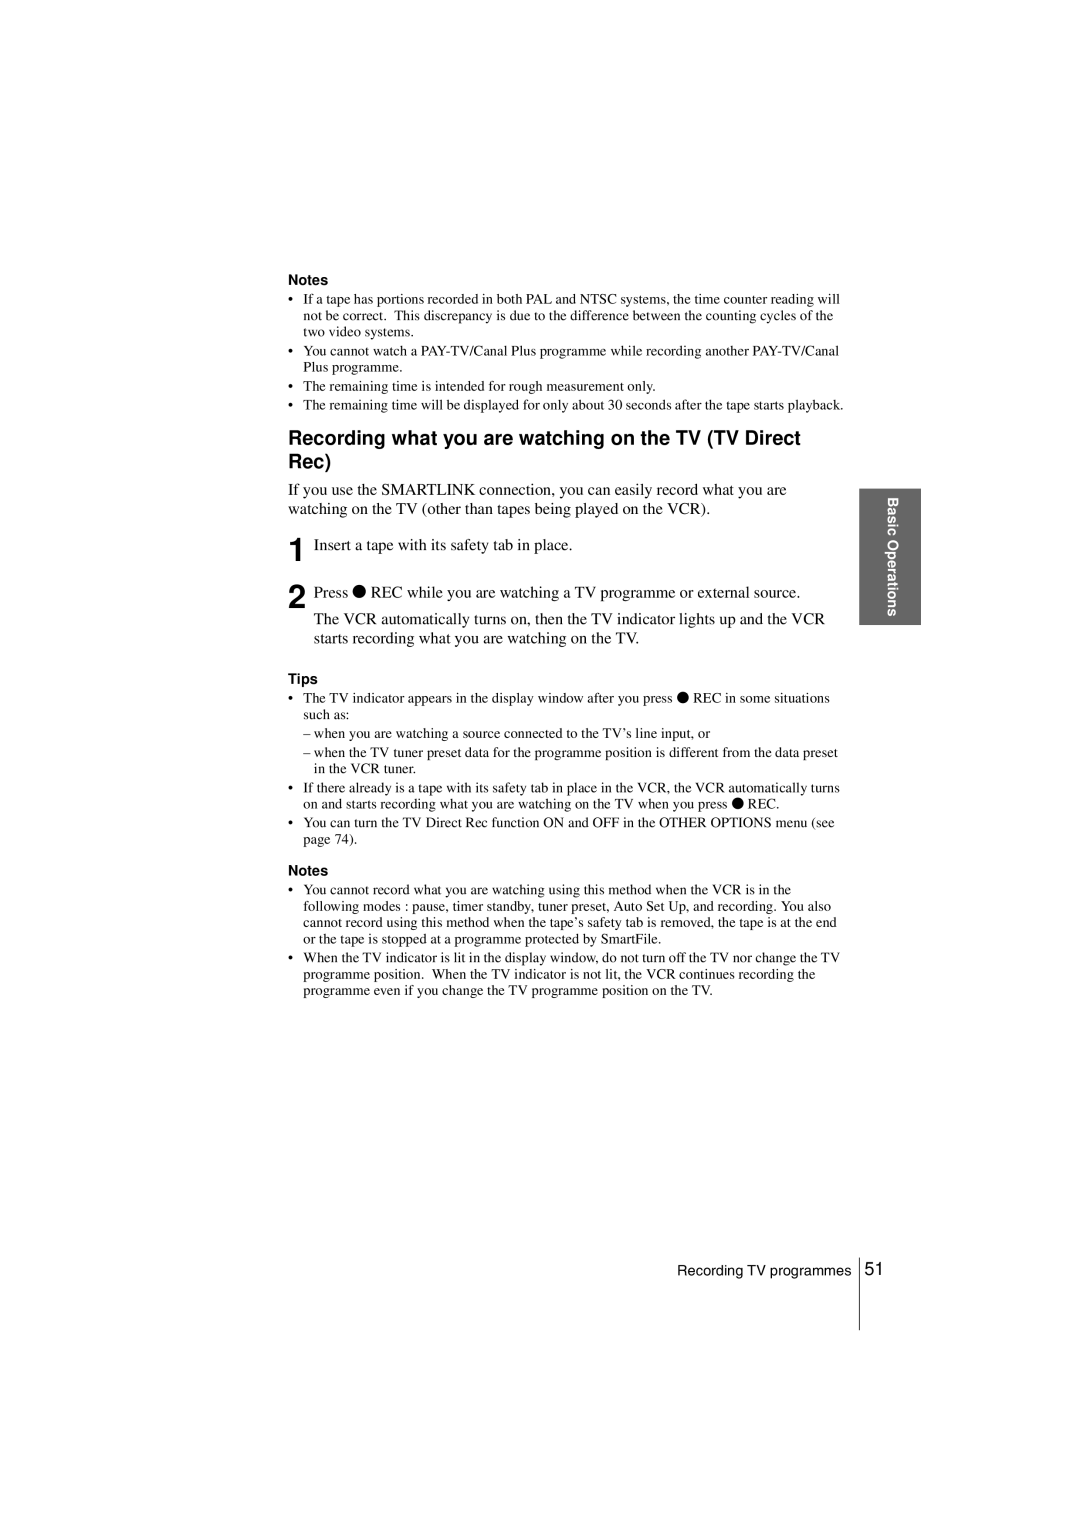 Sony SLV-SF990G manual Recording what you are watching on the TV TV Direct Rec 